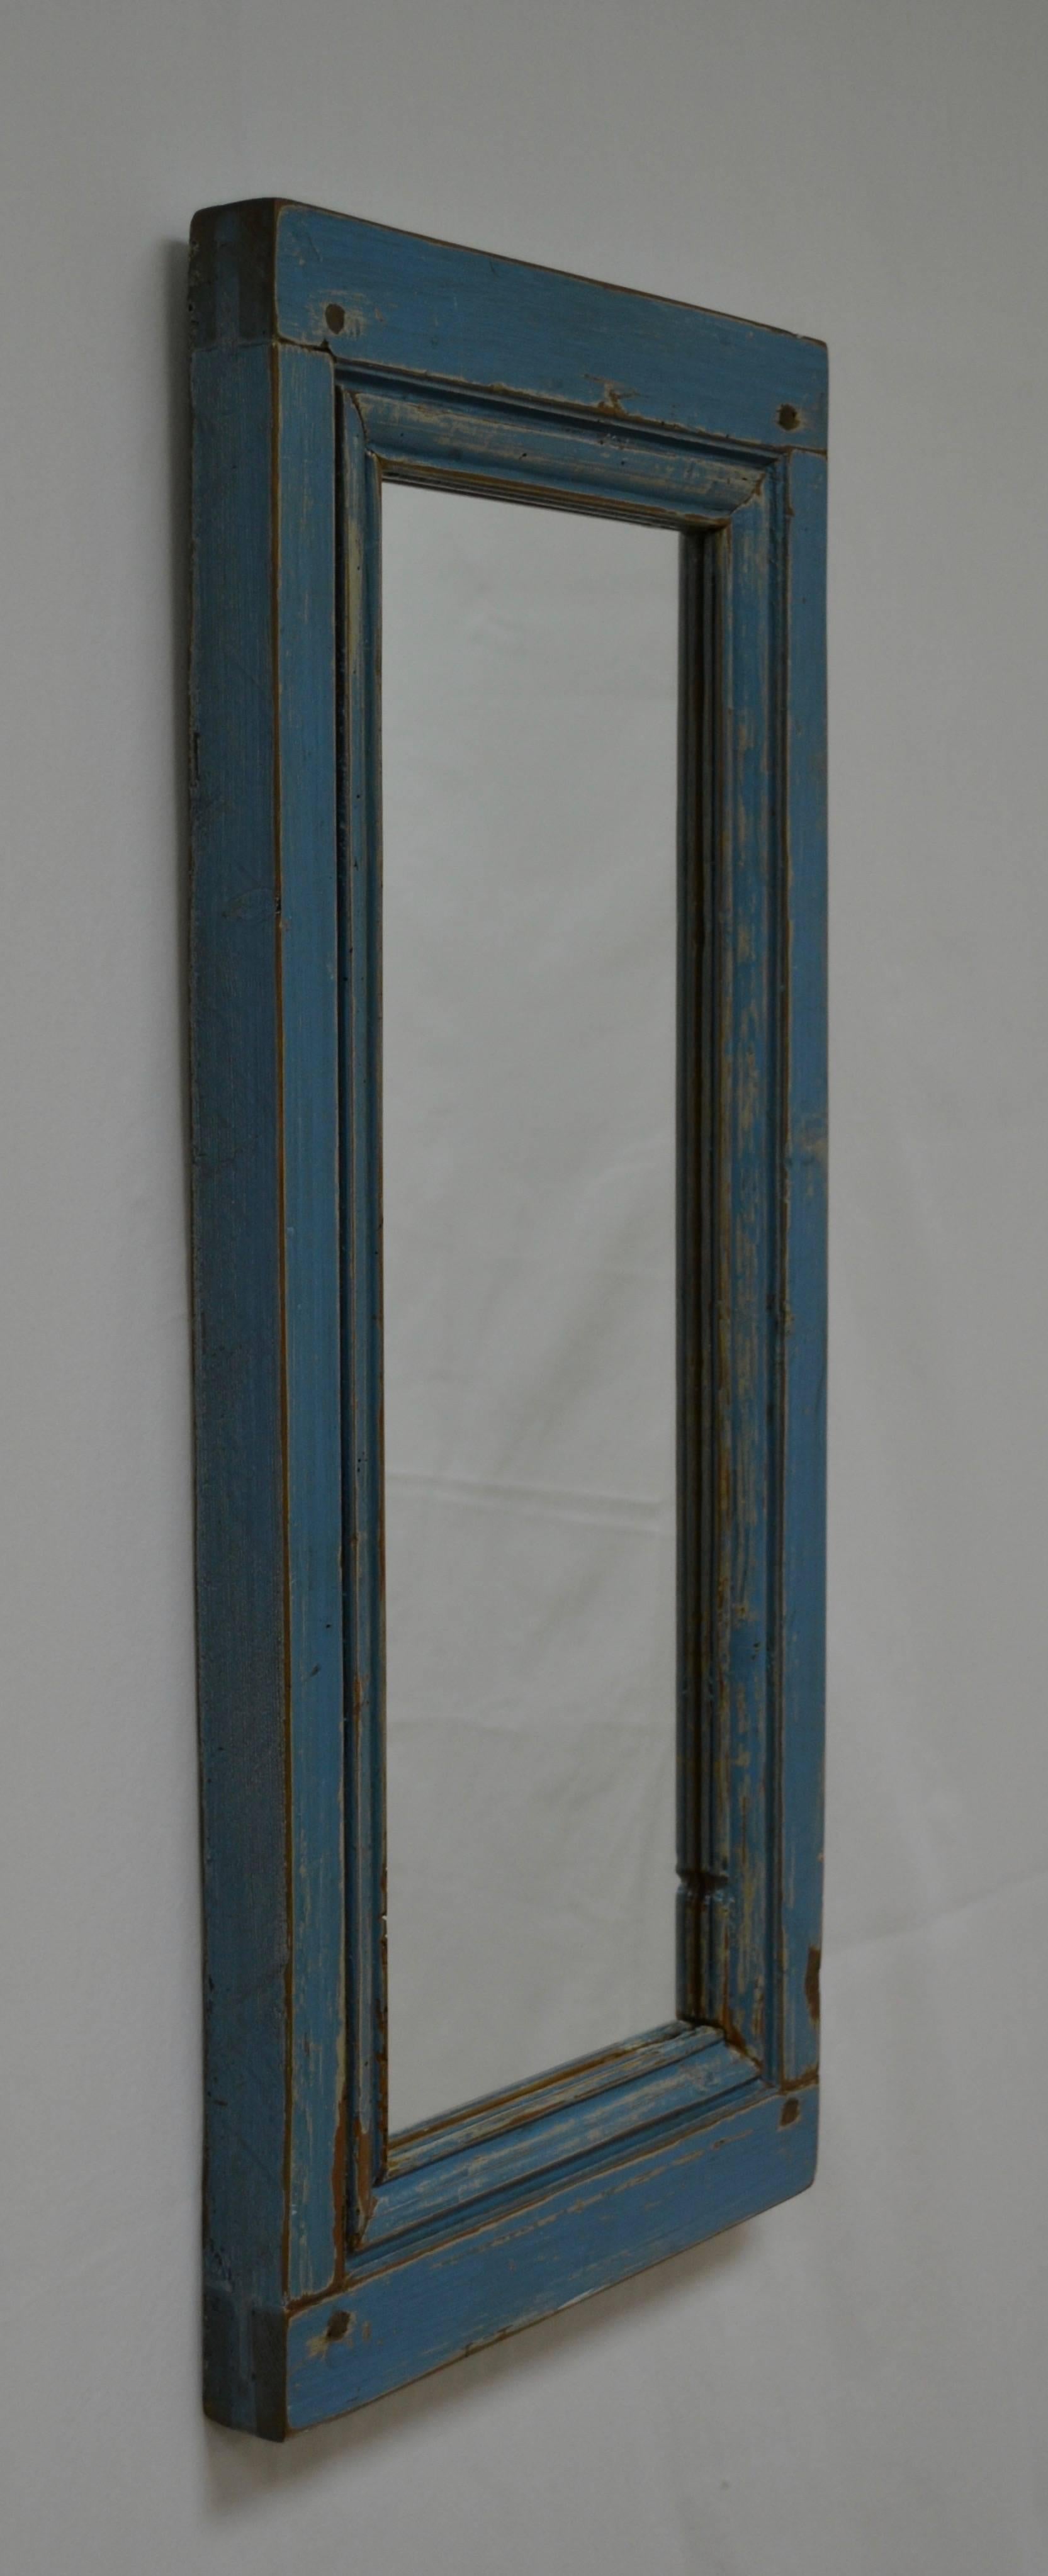 Rustic Pine Wall Mirror from Antique French Panel